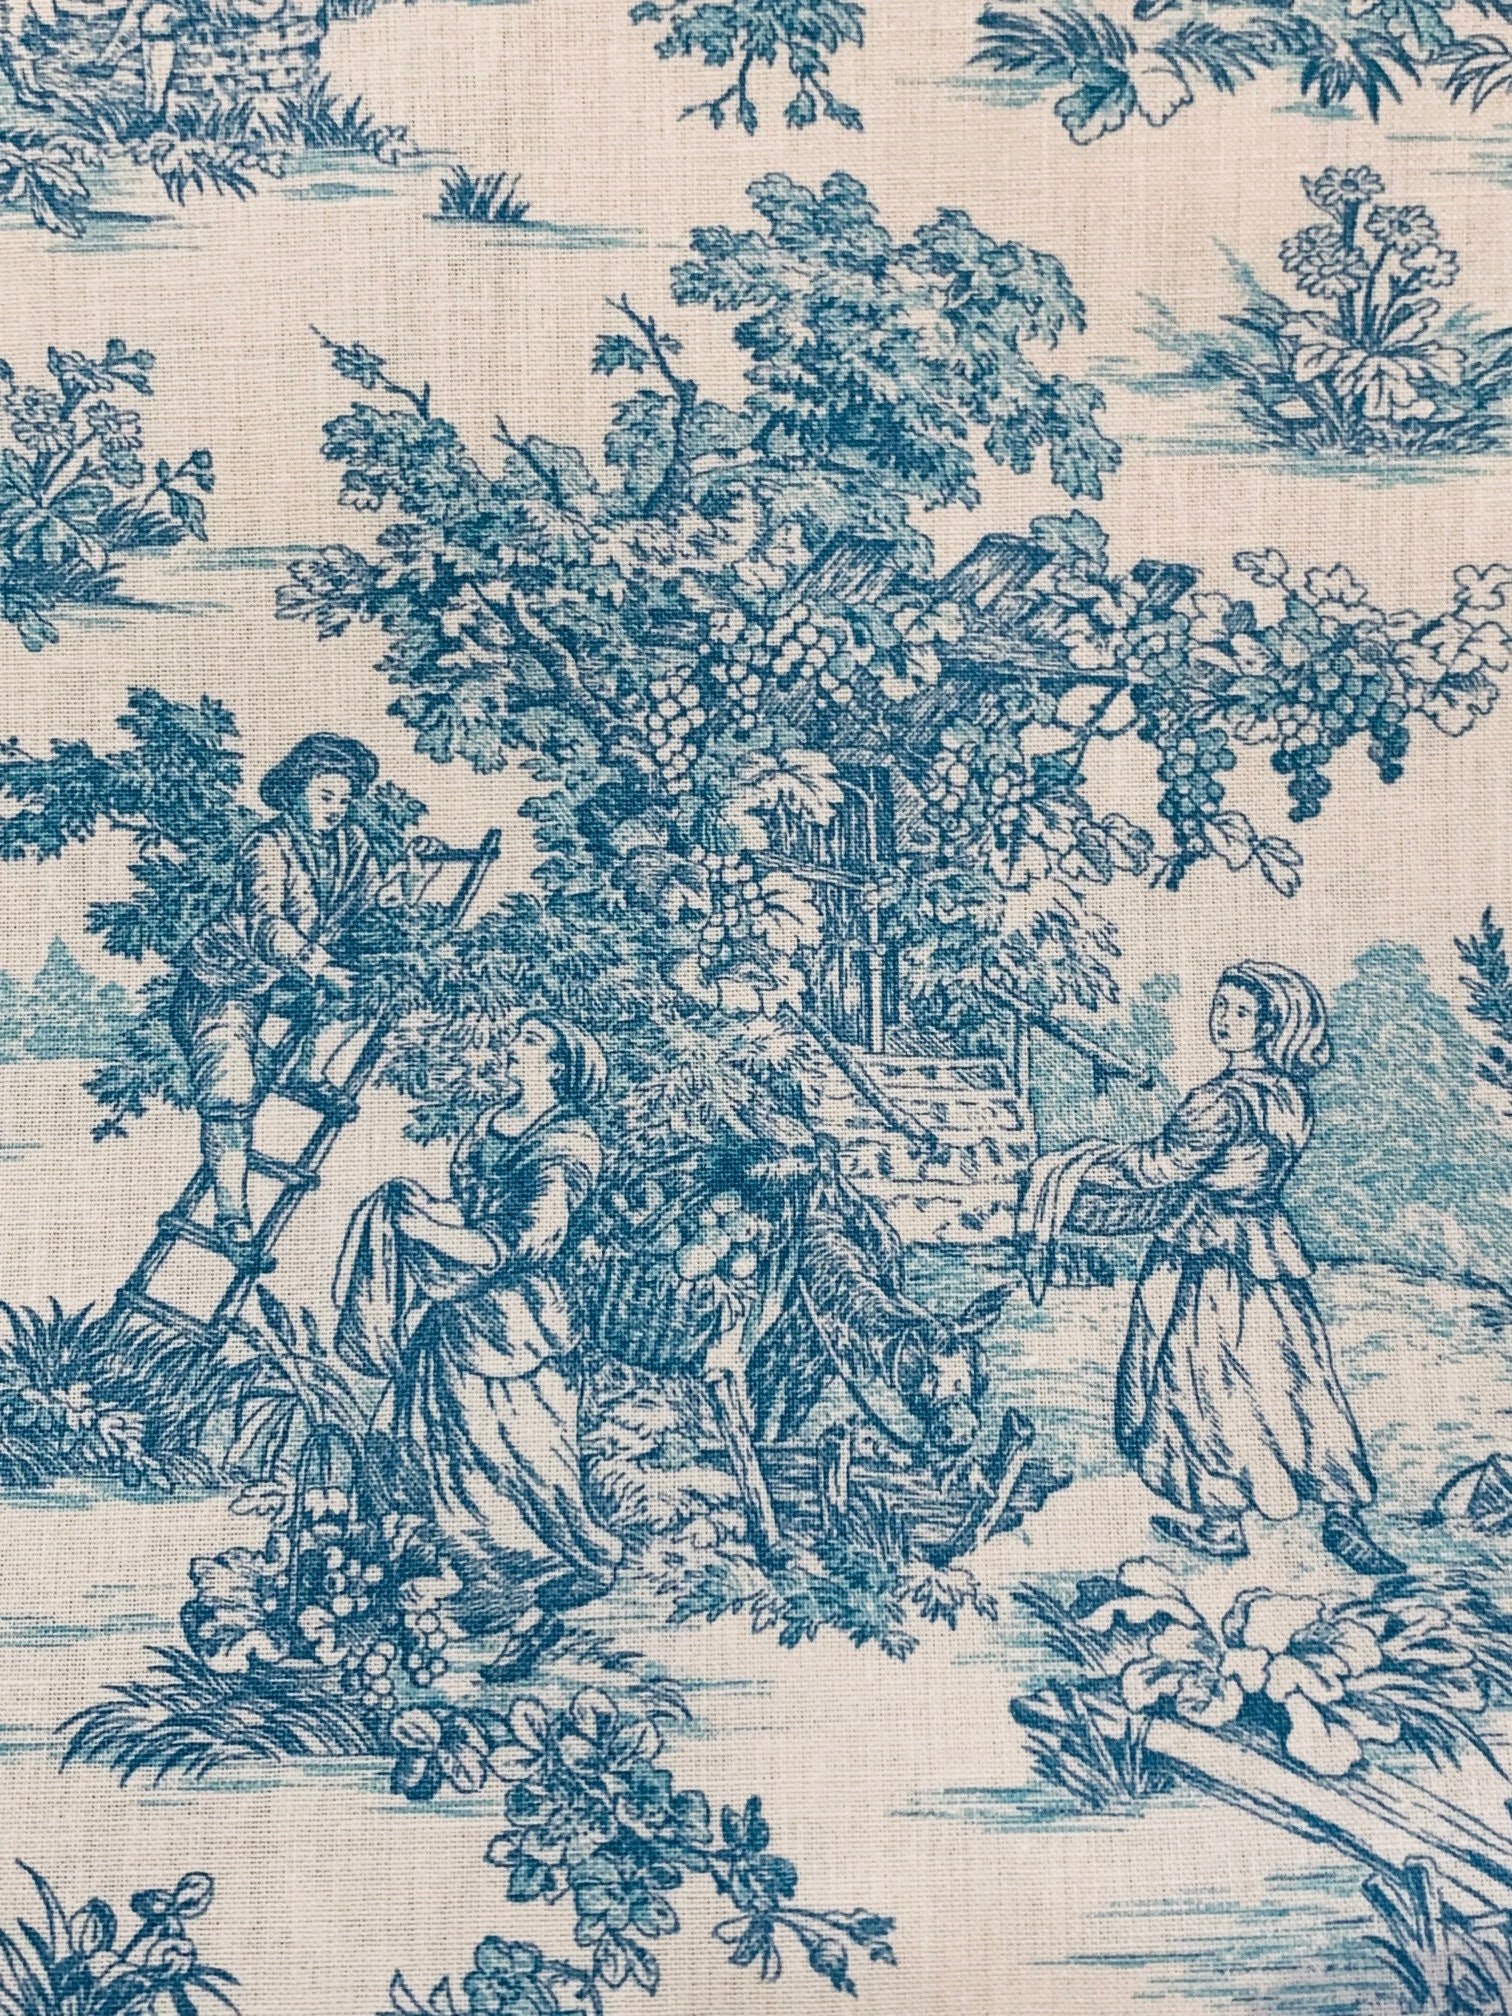 French Decorator Weight Pastoral Toile Fabric in Green and Cream 109 Wide,  Priced by the YARD, for Sewing, Drapery, Pillows and More 